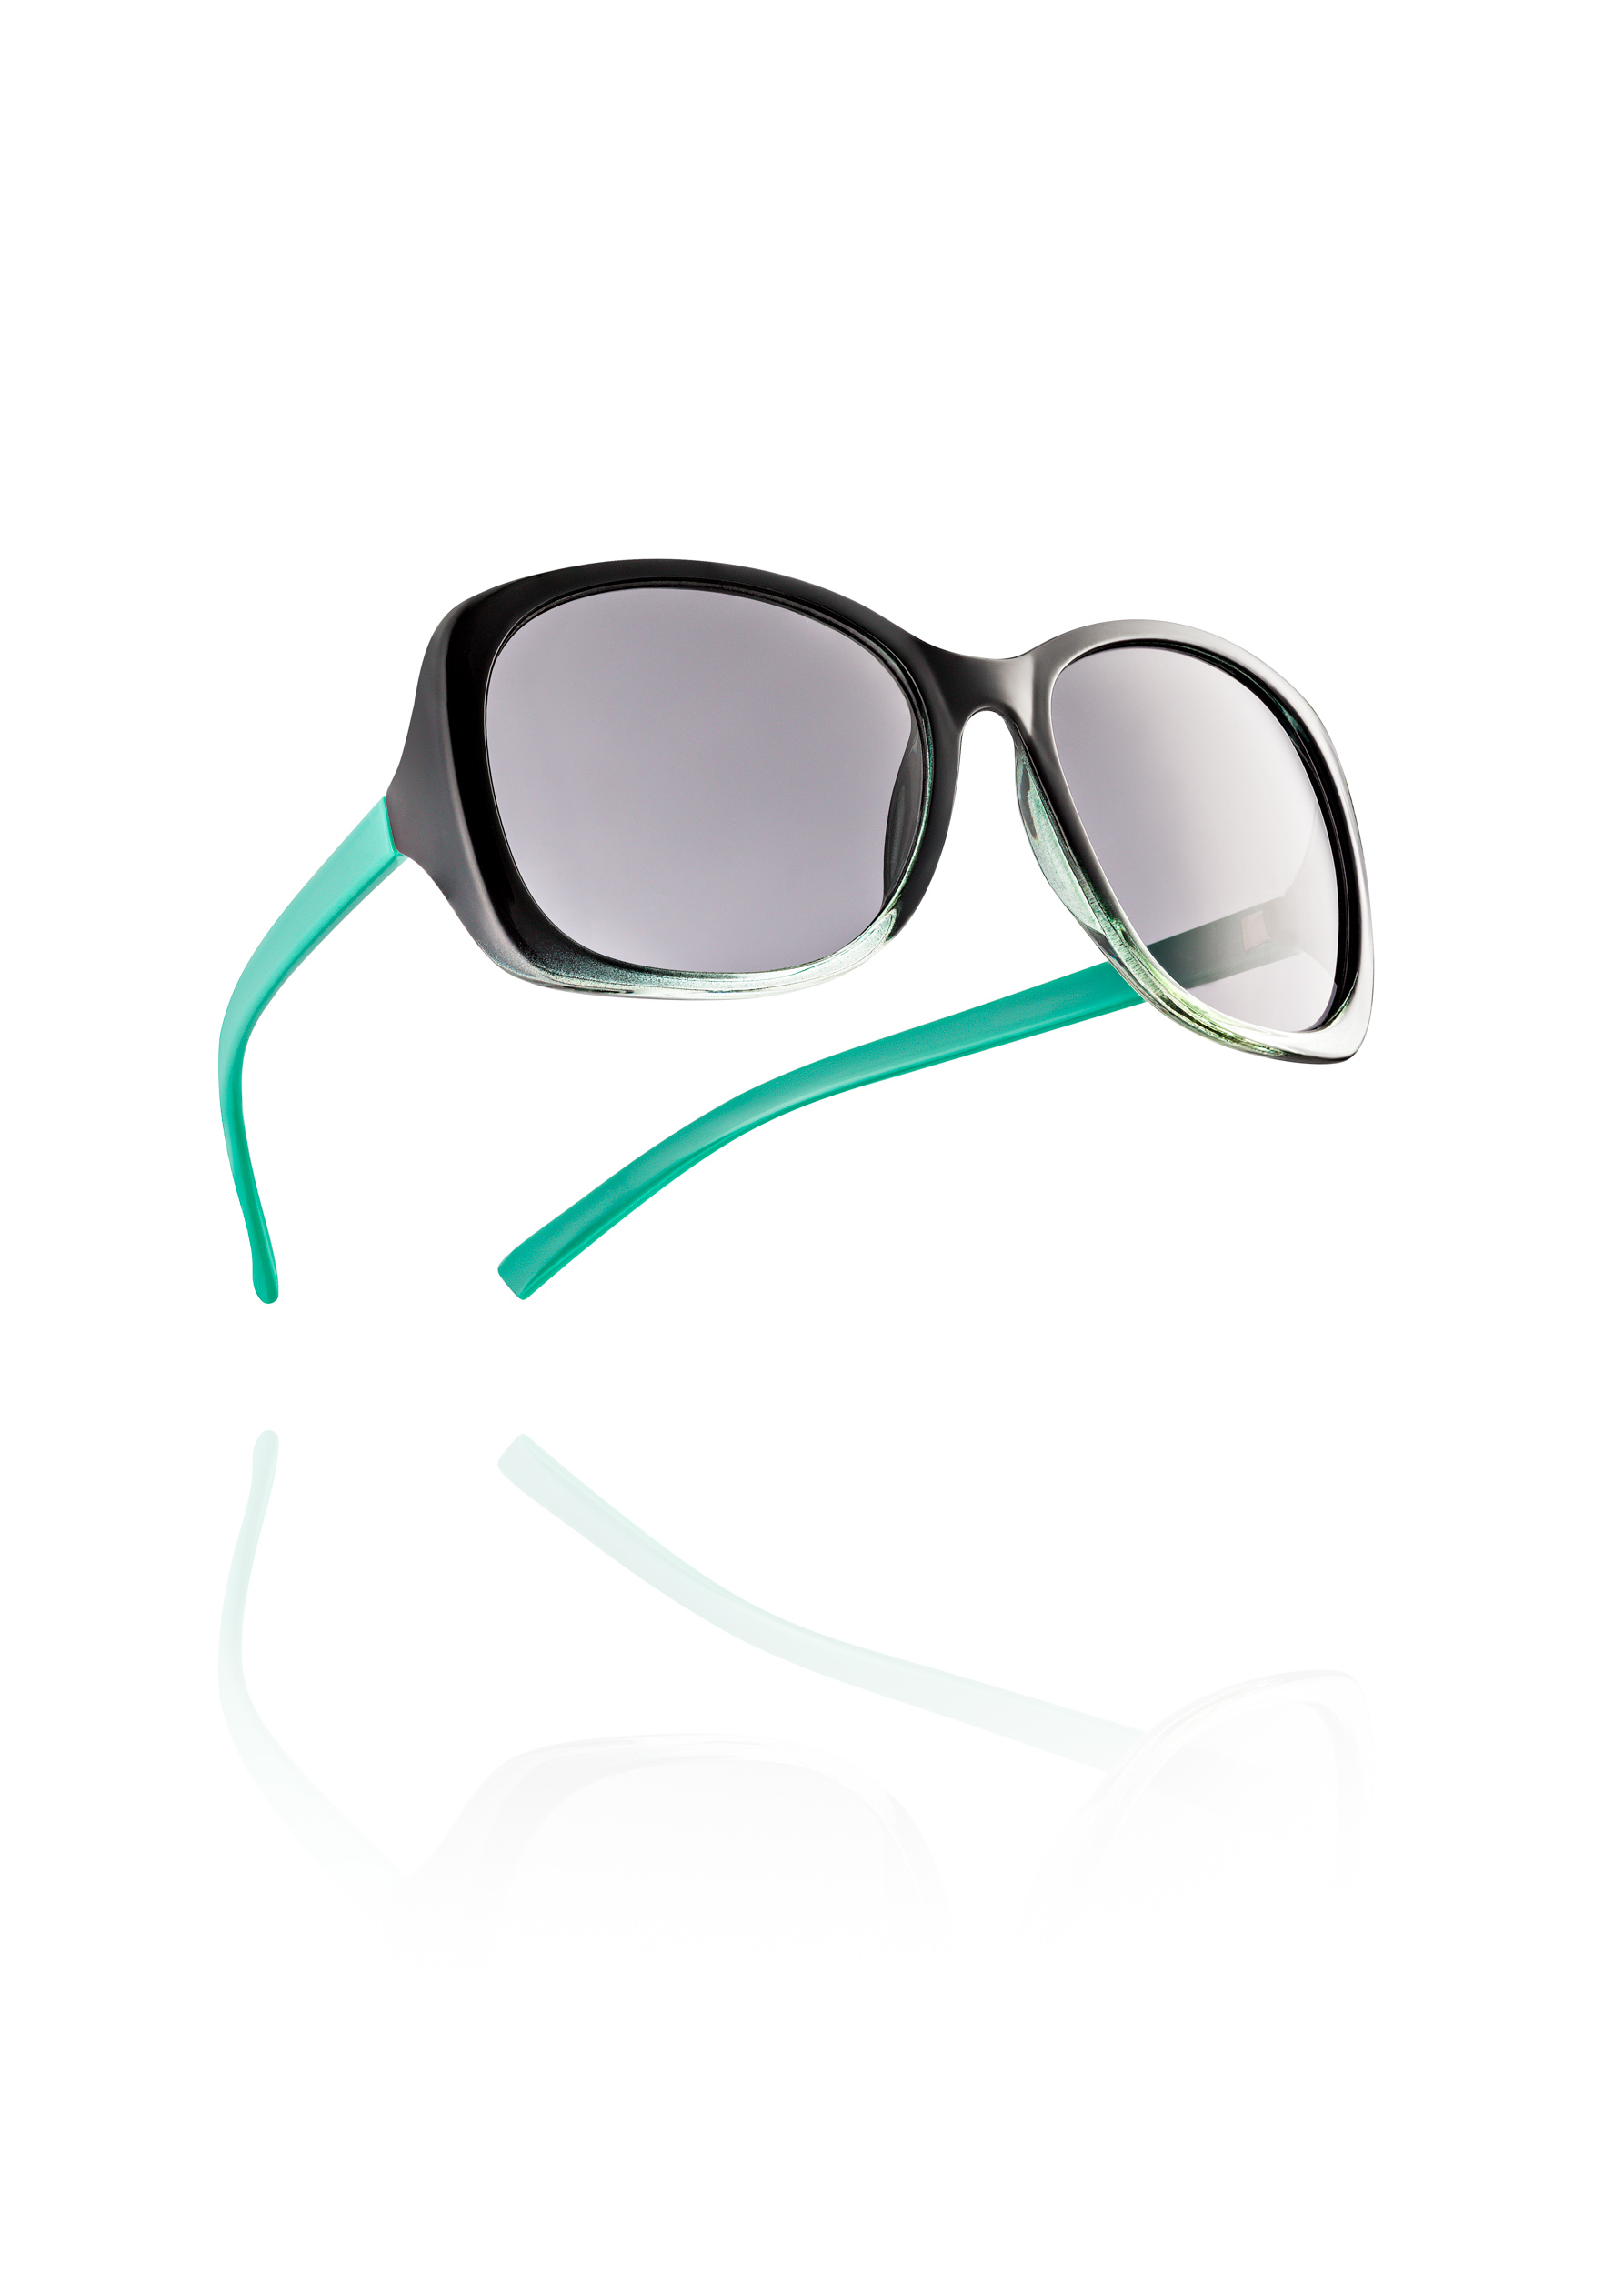 Black and Turquoise Sunglasses | Pack Shot